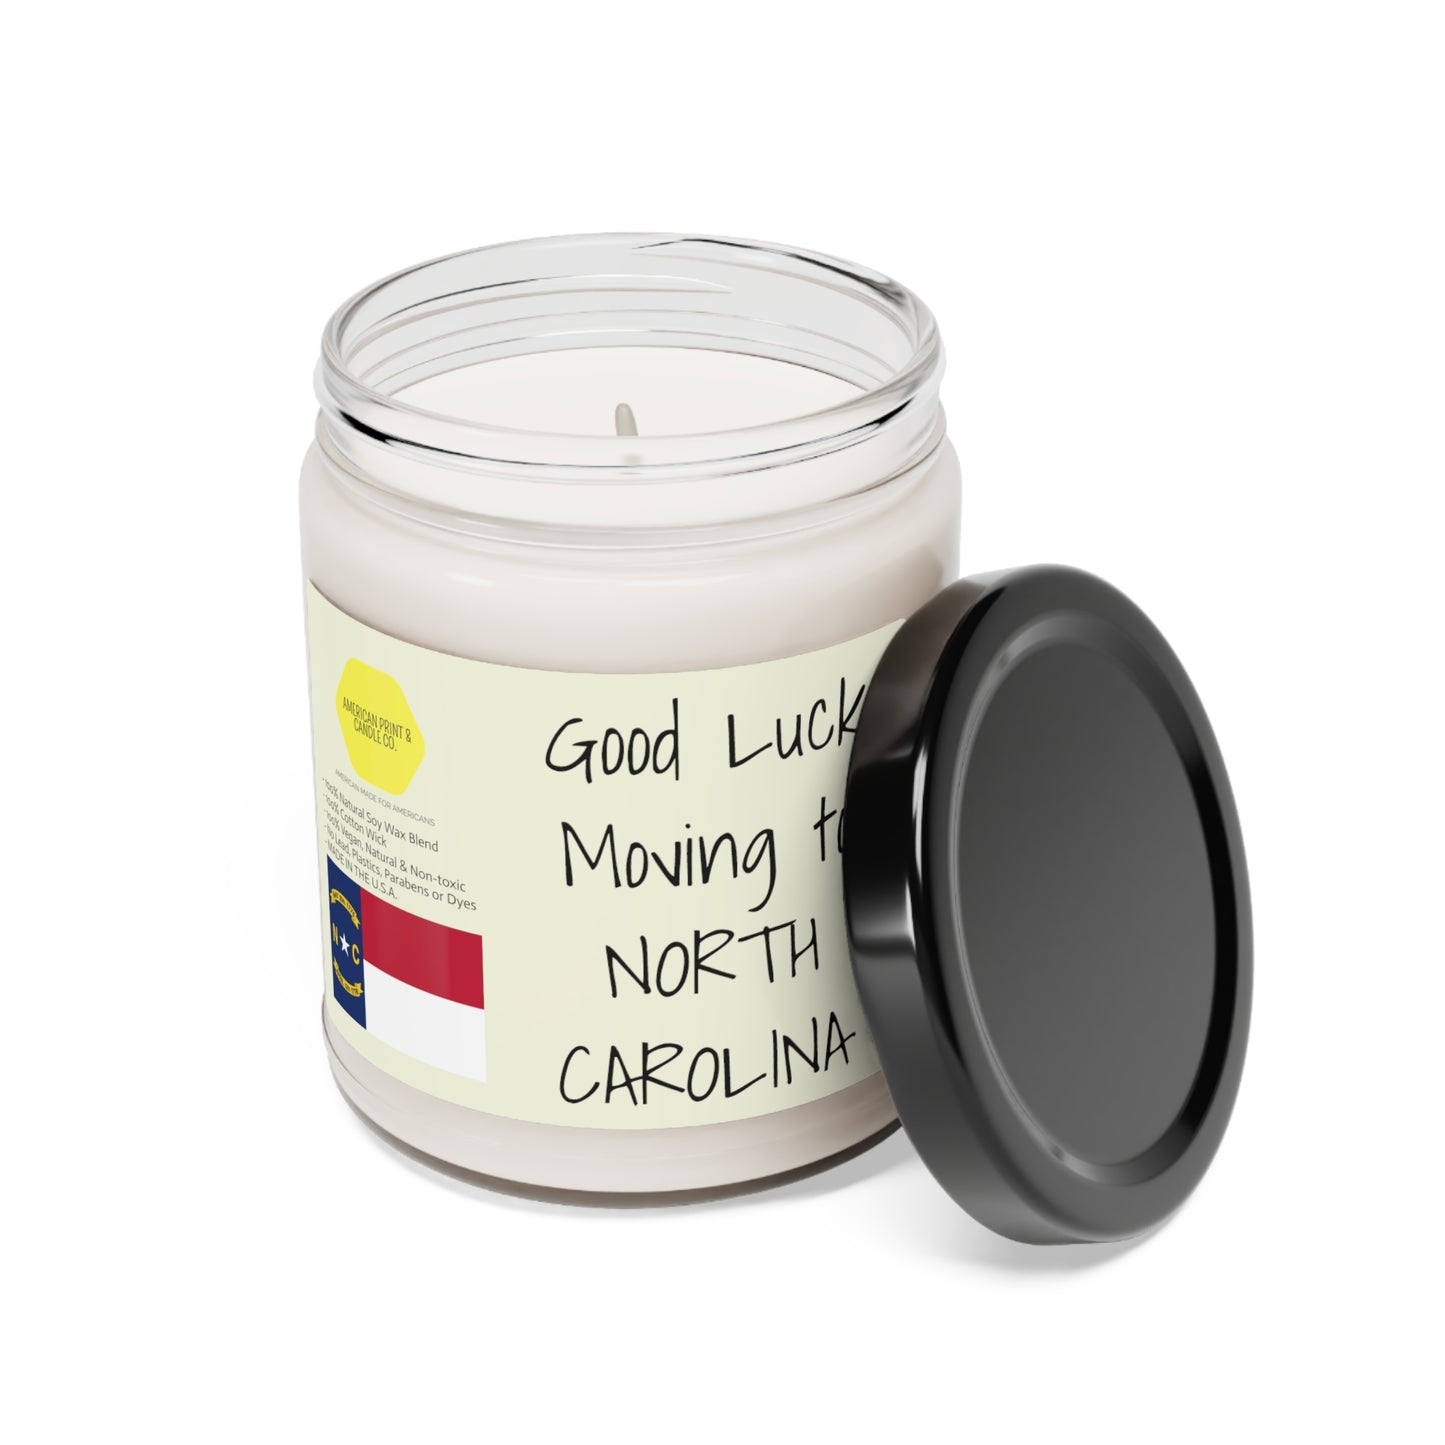 Good Luck moving to North Carolina scented Soy Candle, 9oz